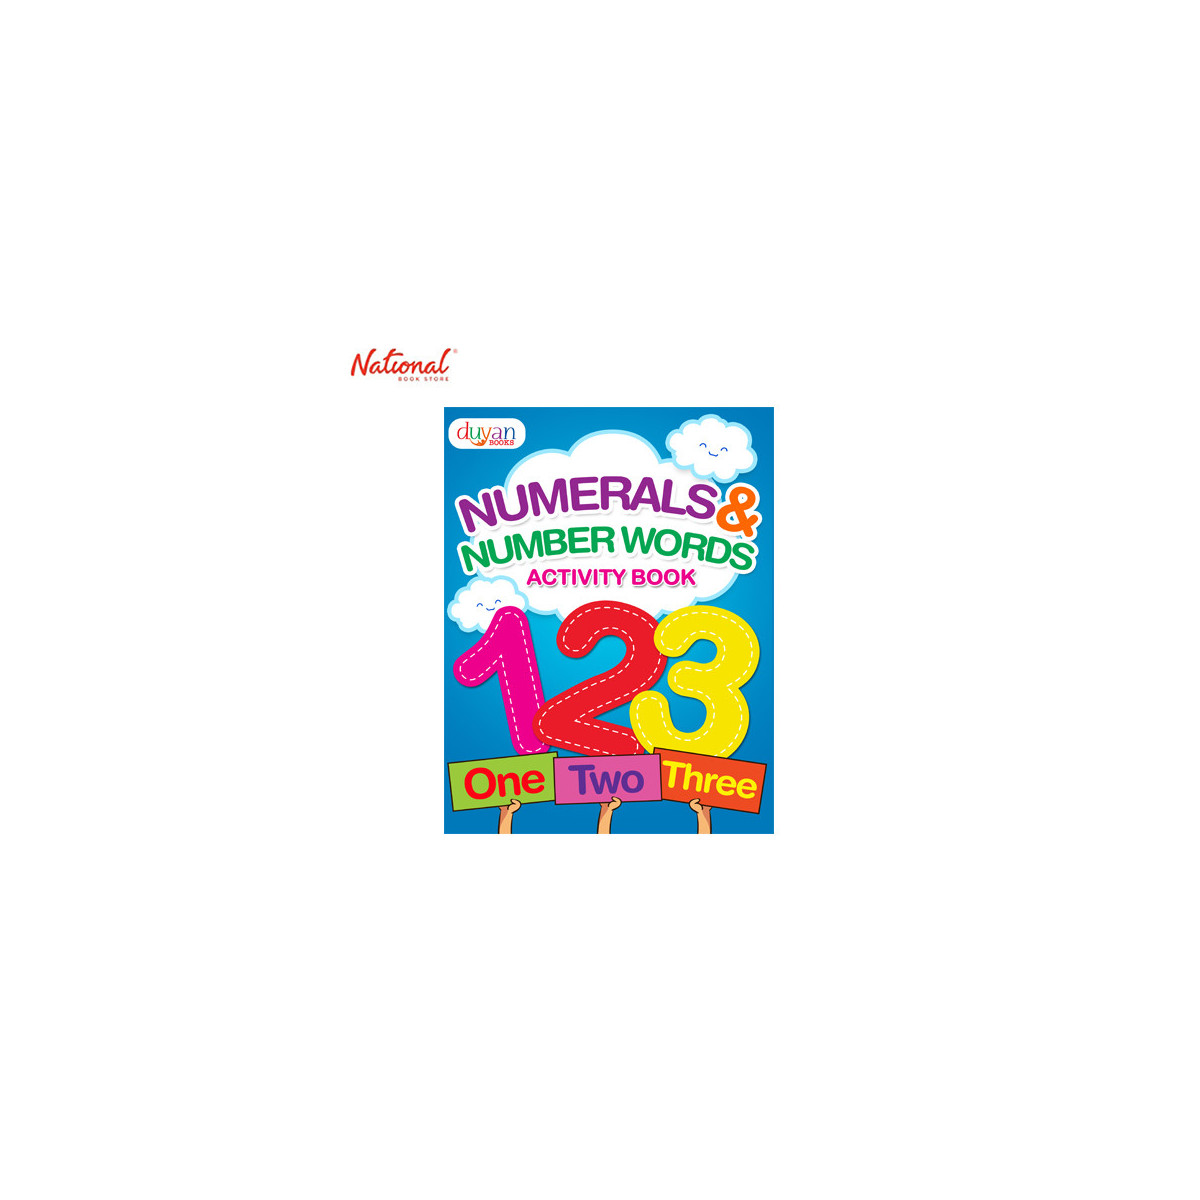 NUMERALS & NUMBER WORDS ACTIVITY BOOK TRADE PAPERBACK